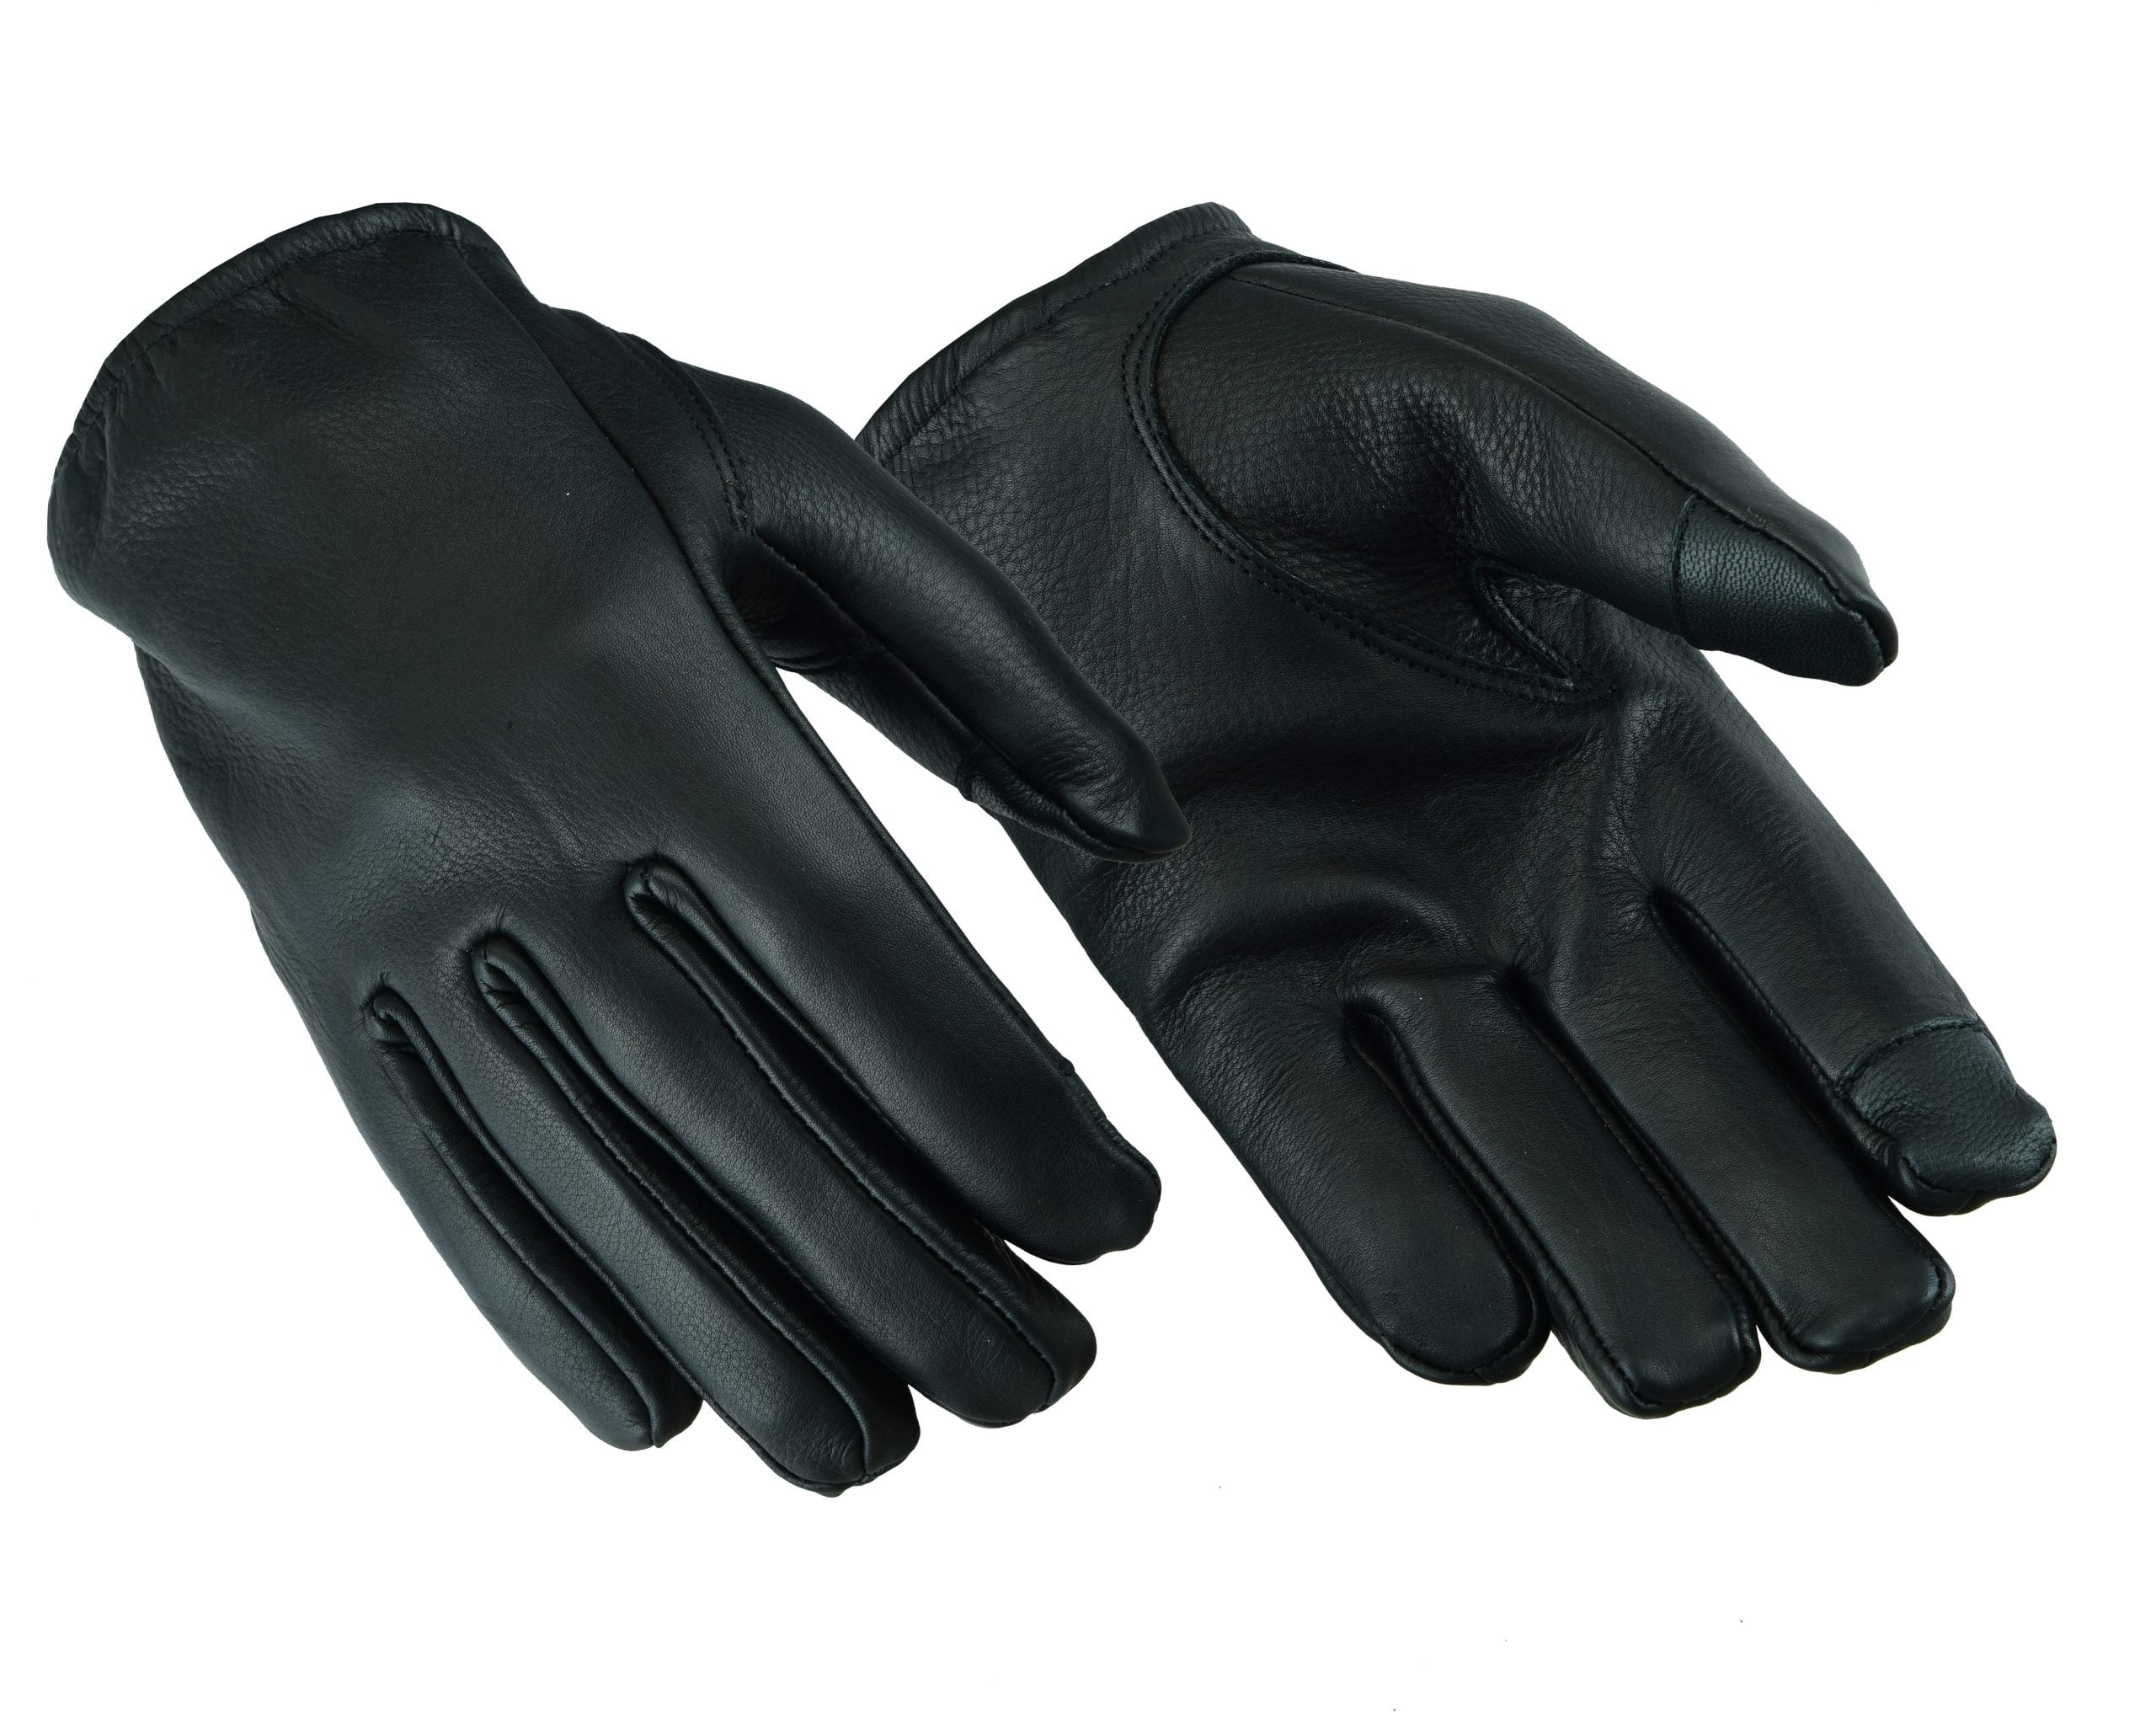 CLASSIC LEATHER DRIVING GLOVES SOFT GEL PADDED MEN'S MOTORBIKE CHAUFFEUR FASHION 